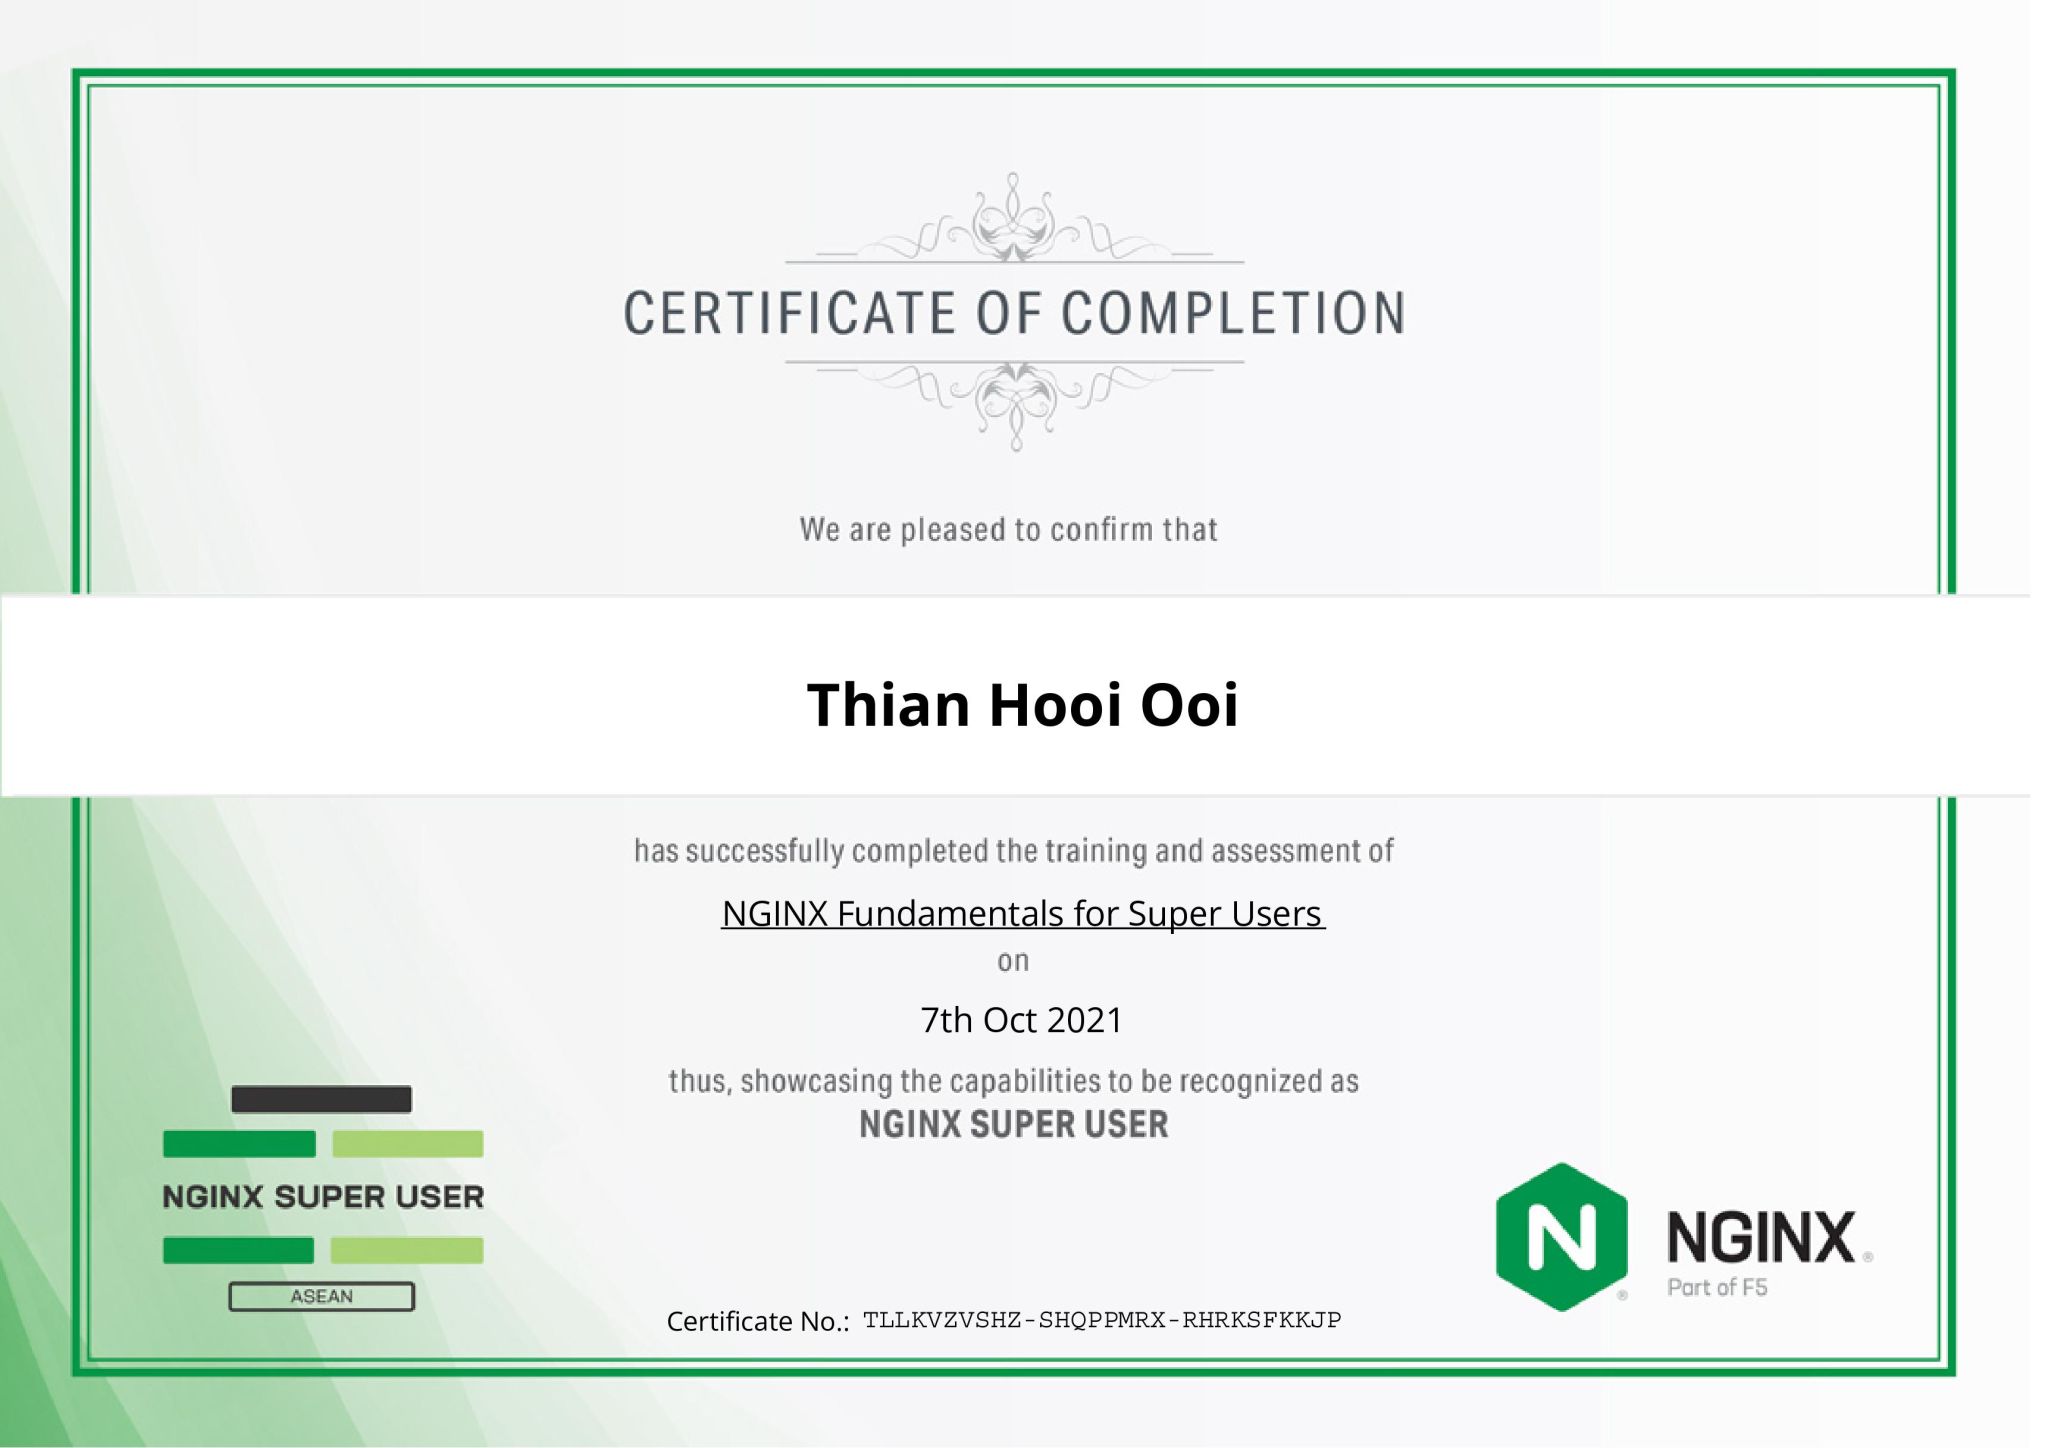 NGINX Fundamental for Super Users-example